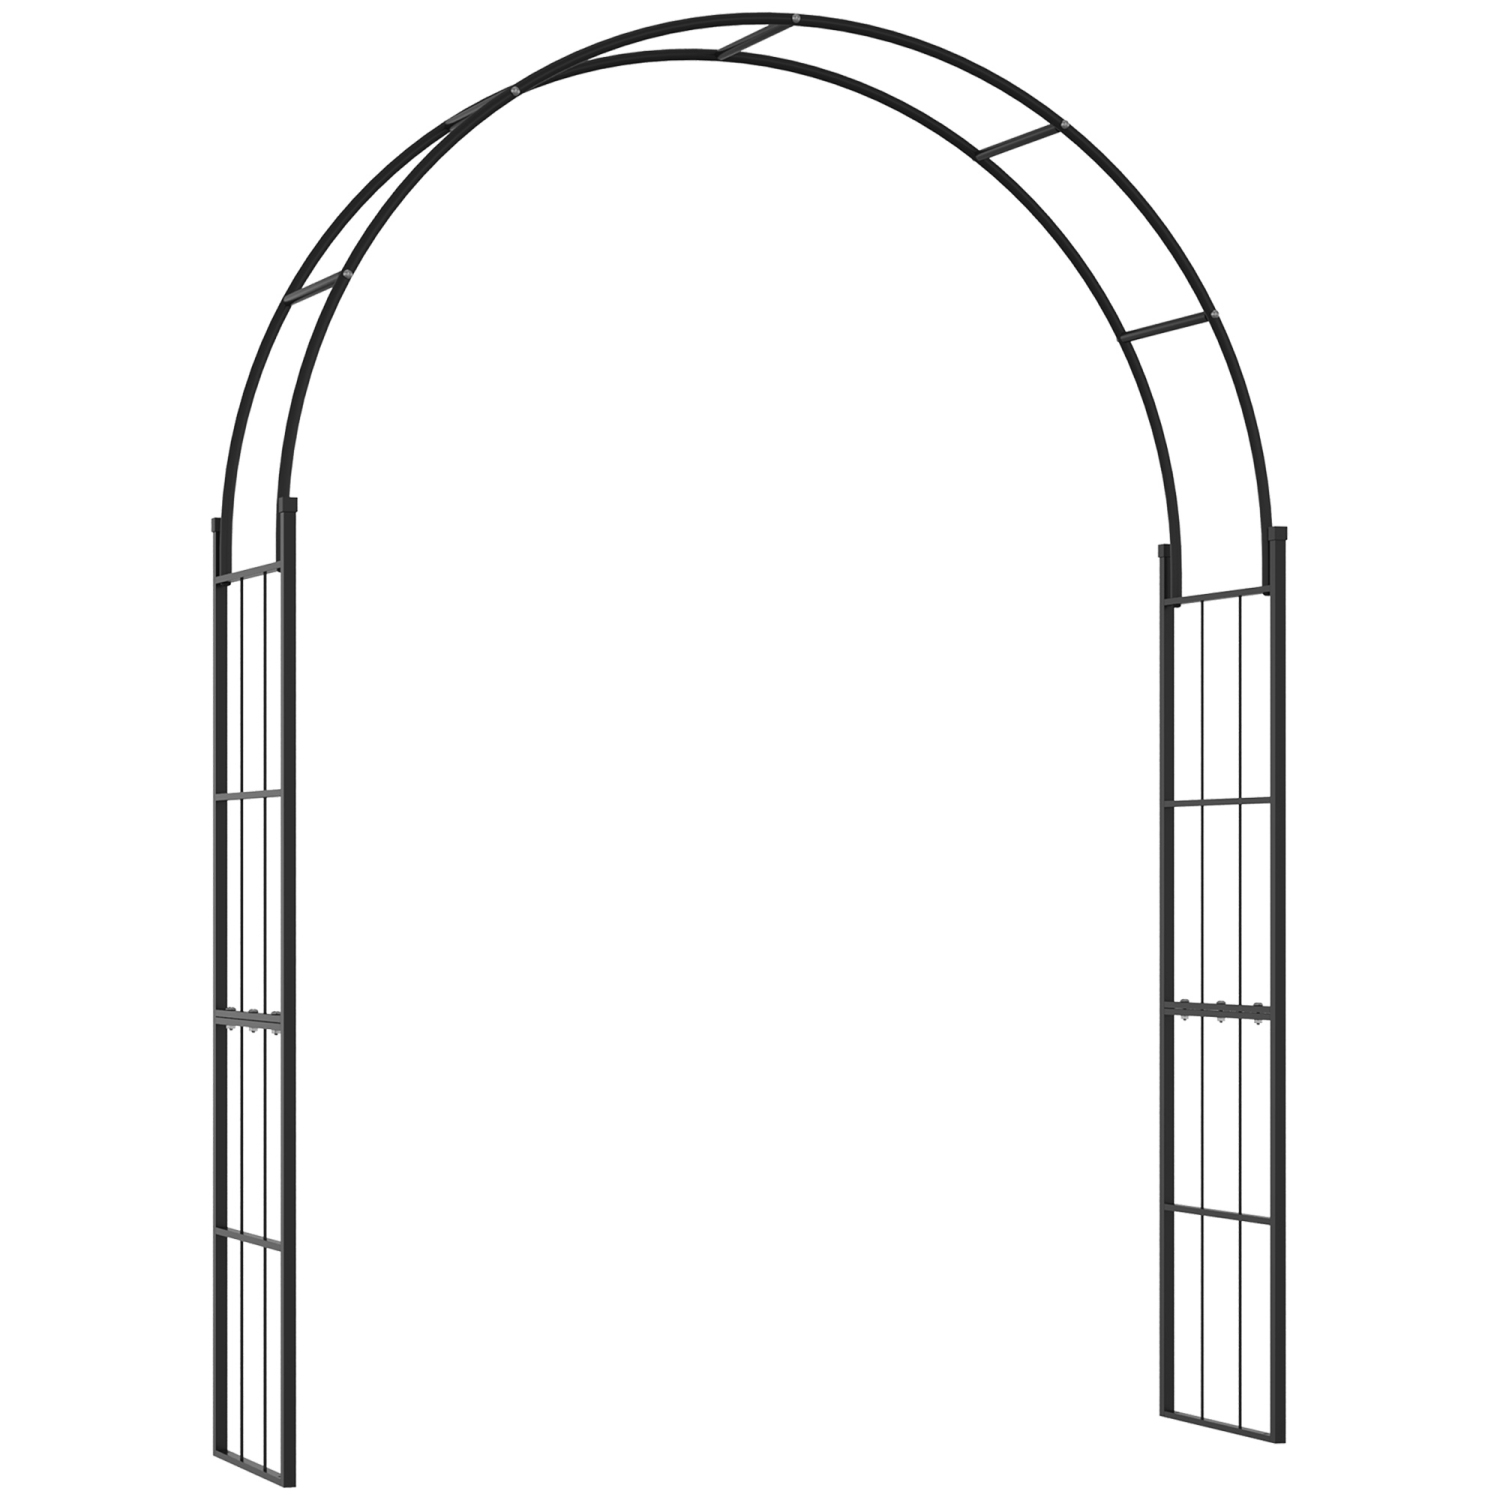 Outsunny 7FT Garden Arch Trellis, Outdoor Wedding Arbor for Ceremony for Climbing Roses, Vines and Plants